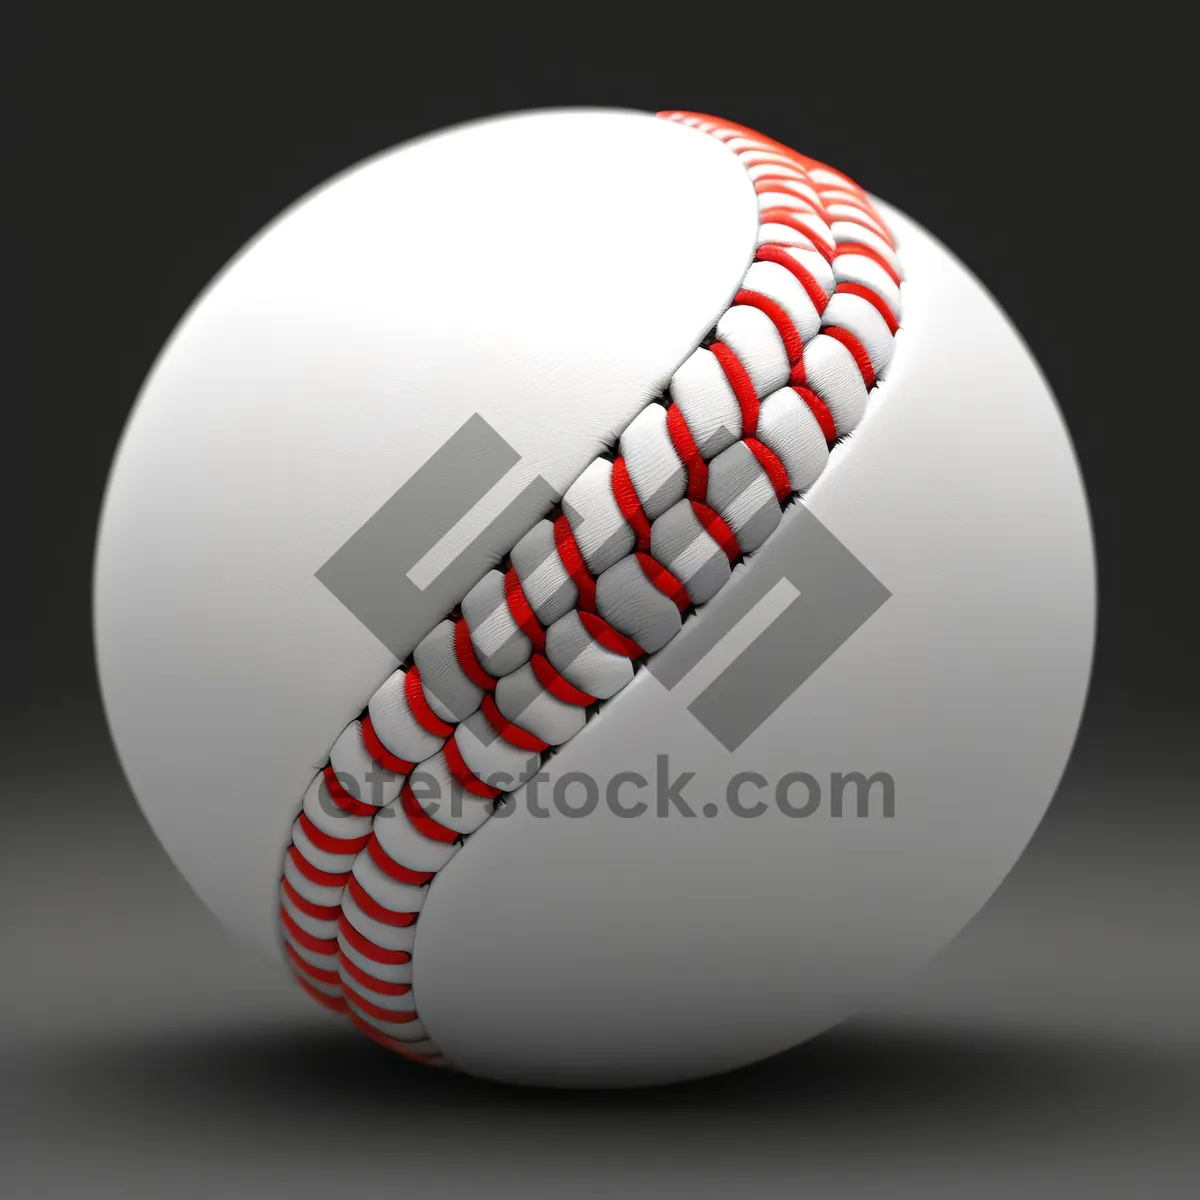 Picture of 3D Baseball Equipment in Play